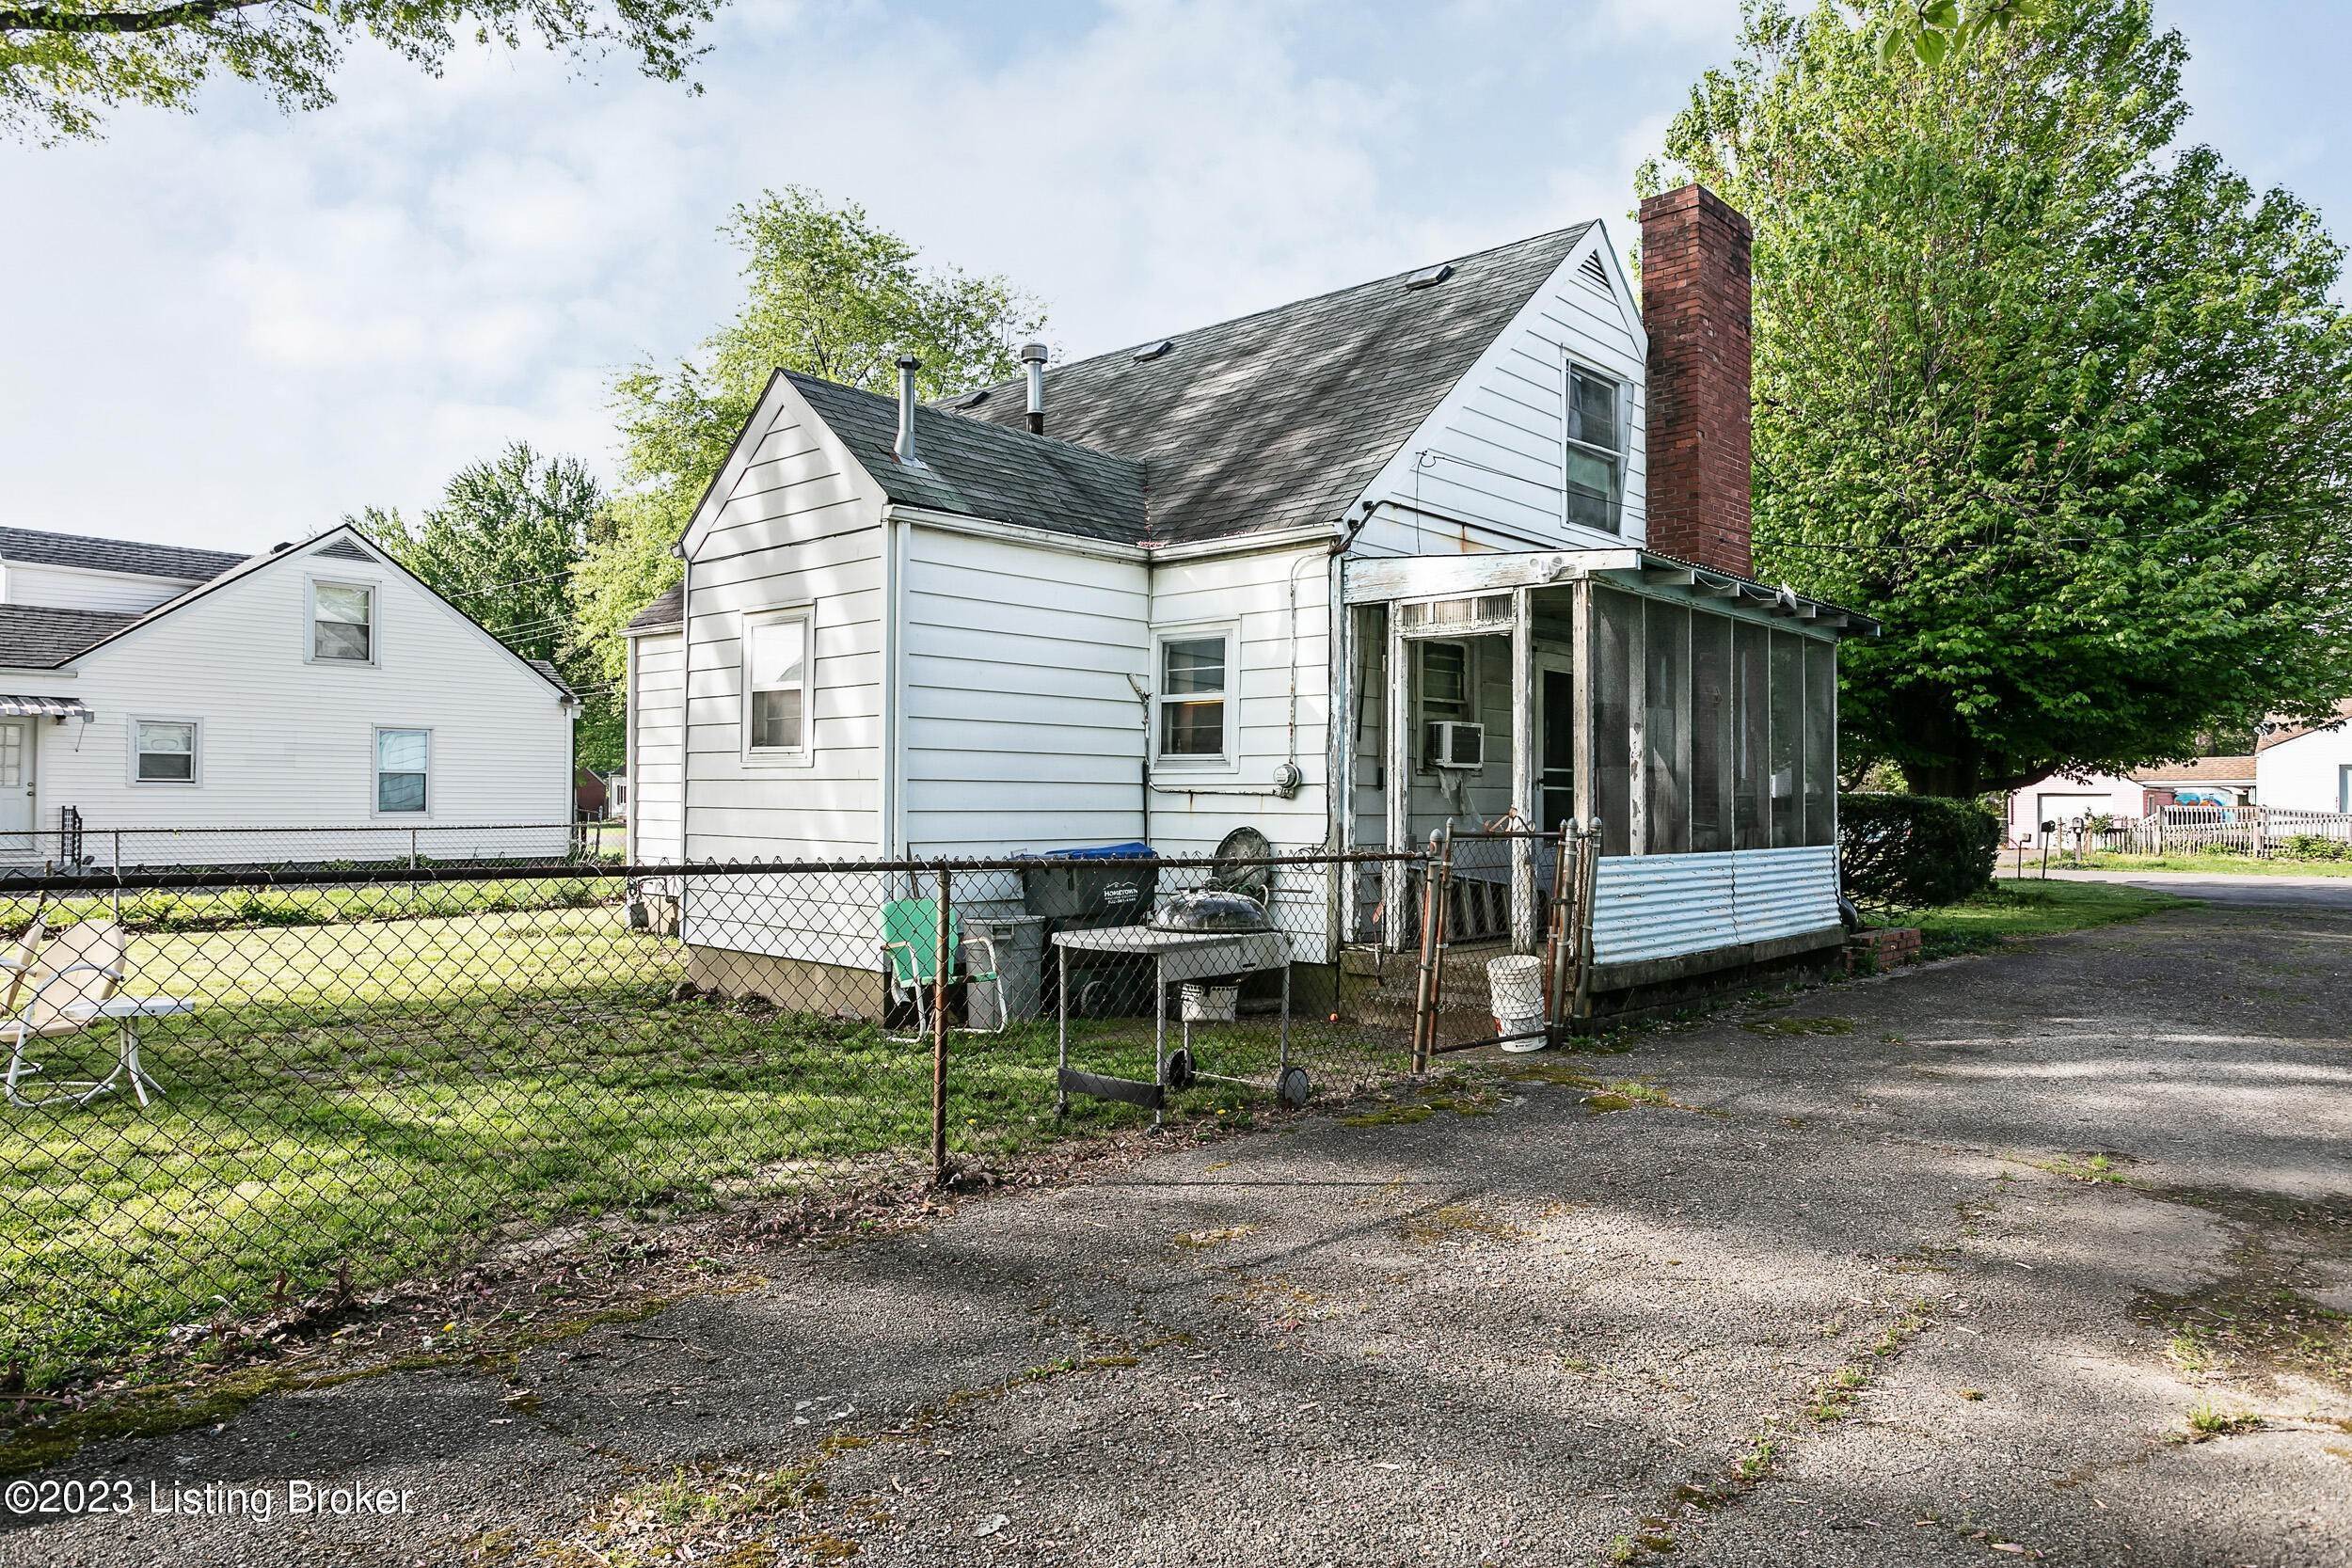 6. Single Family at Louisville, KY 40219